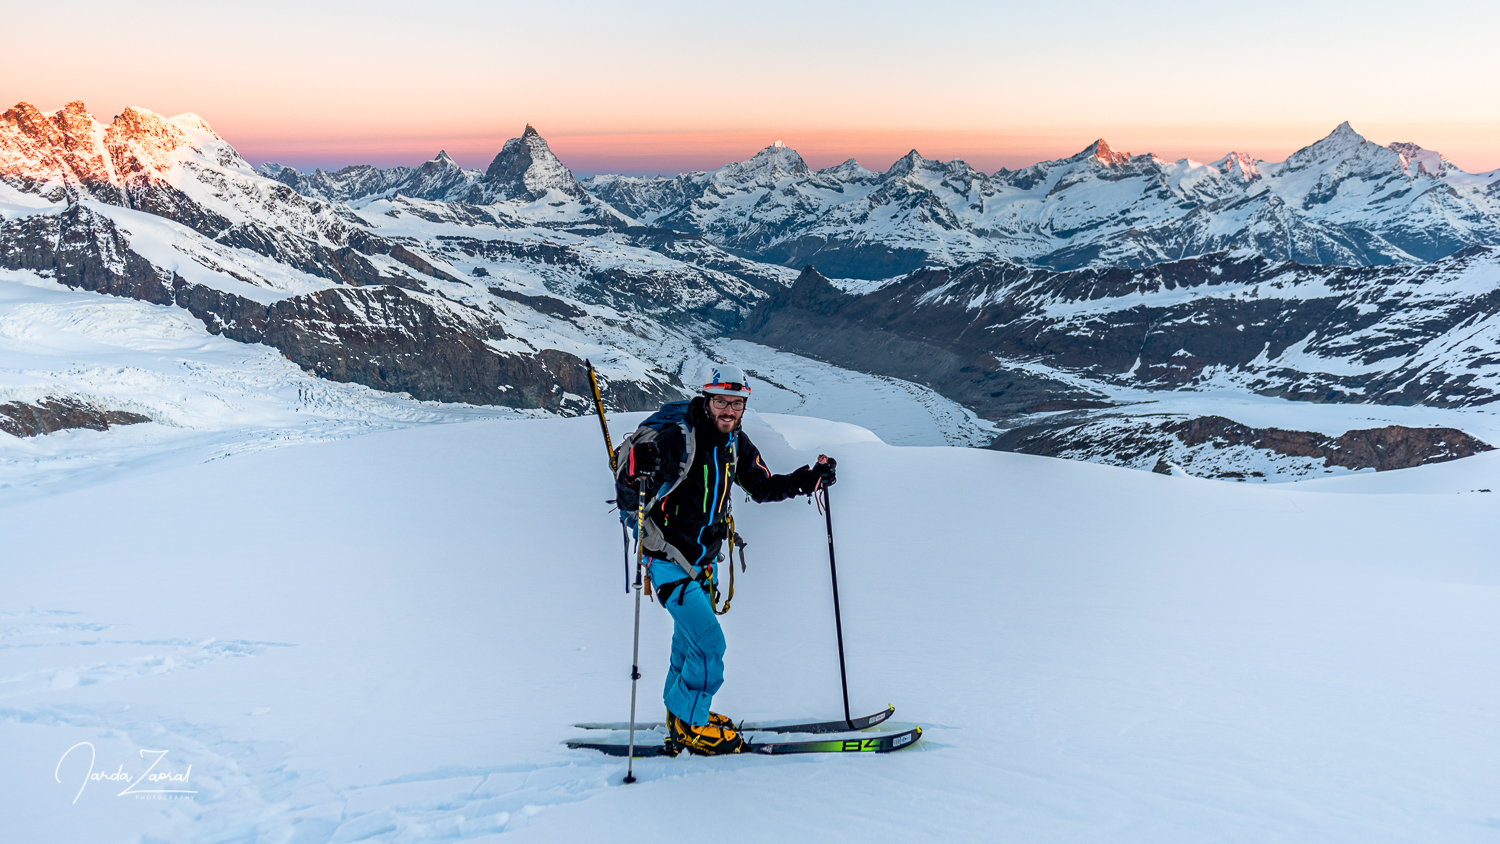 Skier enjoys sunrise and view to Matterhorn and other Swiss mountains